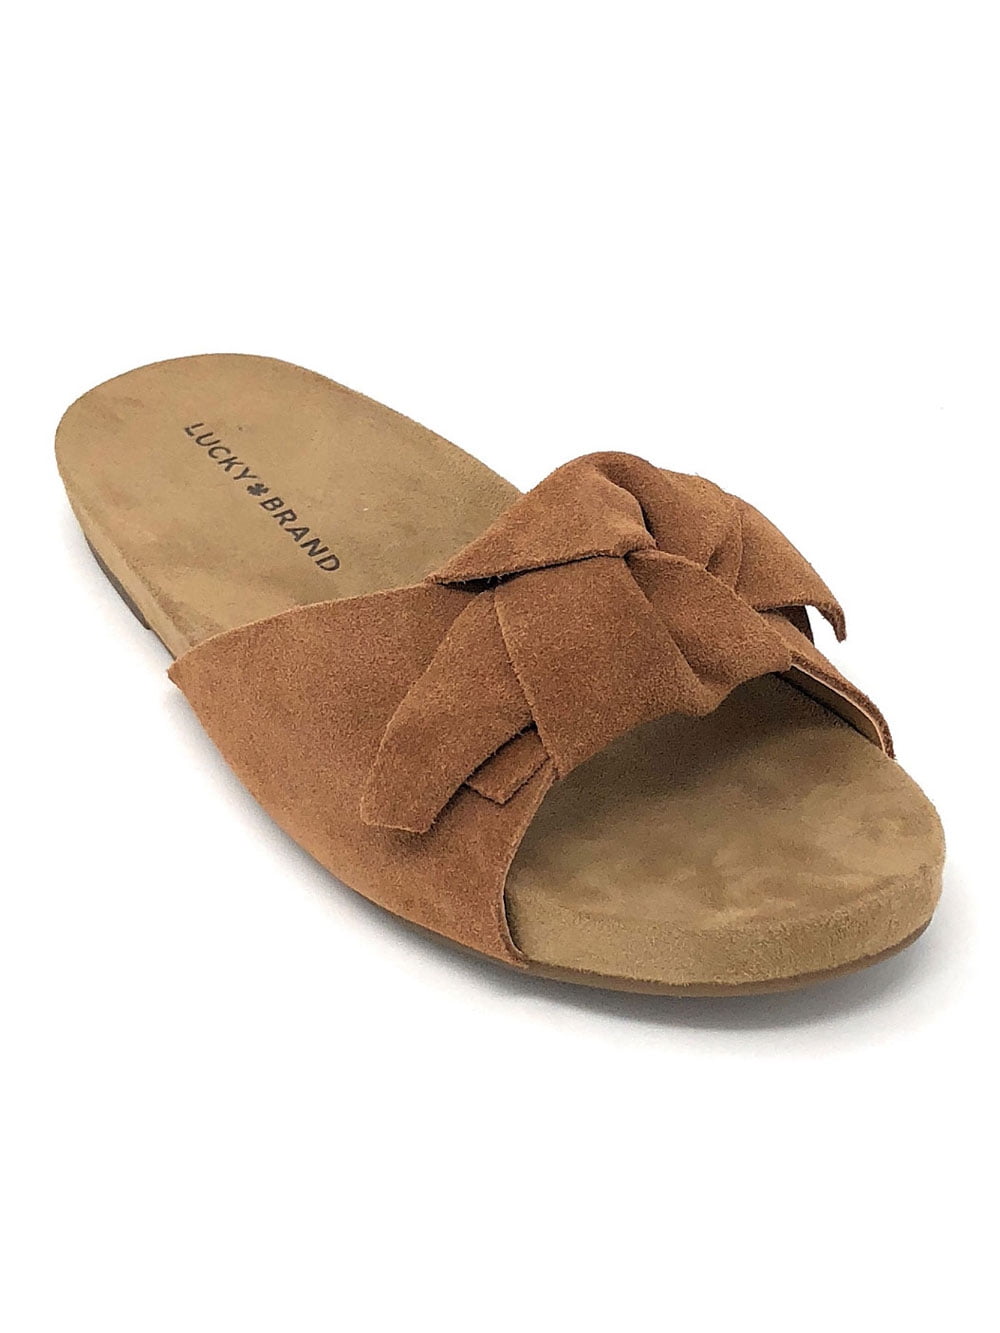 lucky brand suede sandals